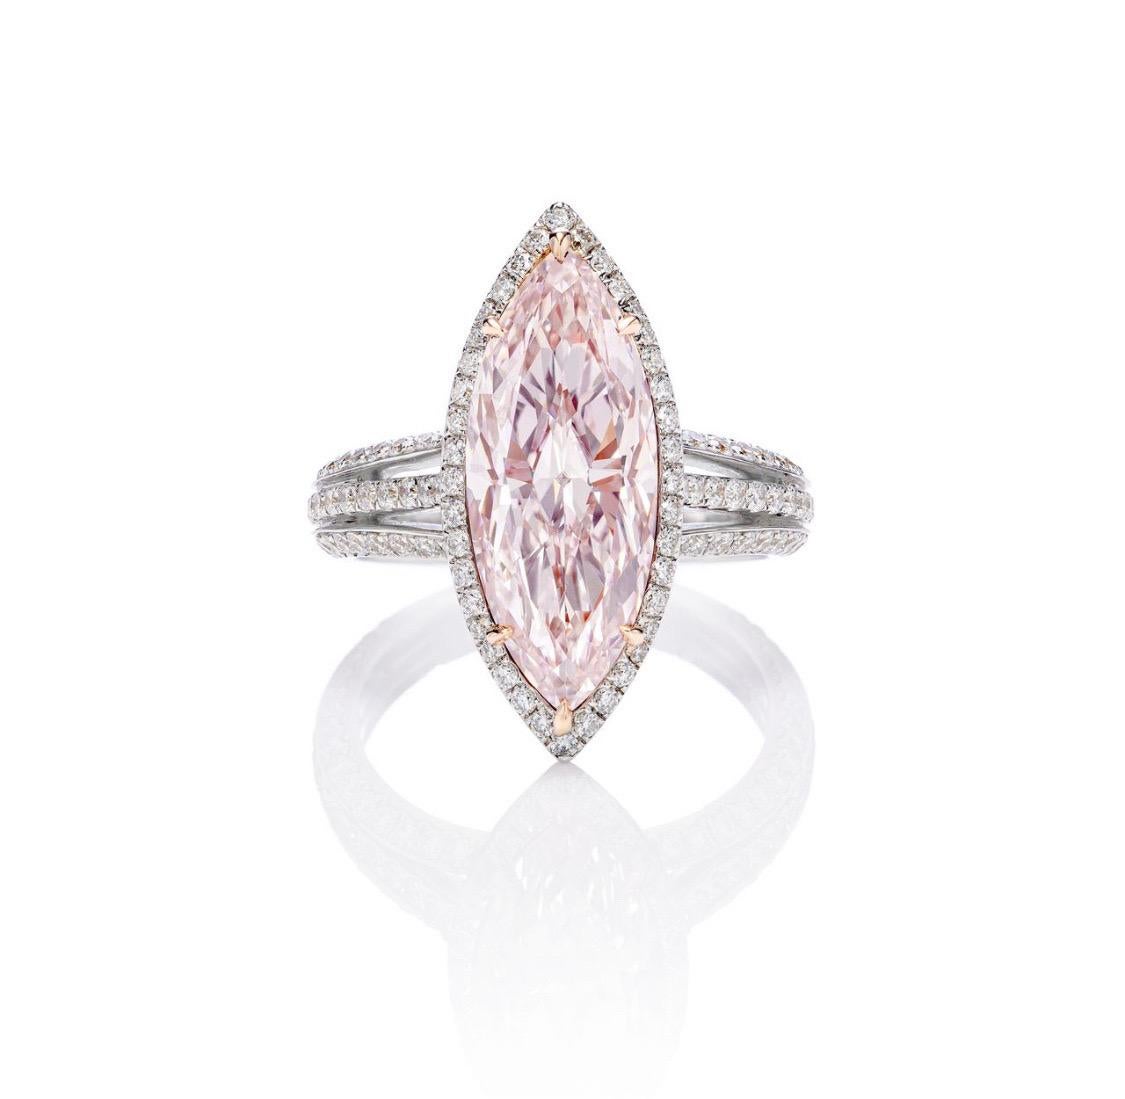 Marquise Cut Emilio Jewelry GIA Certified 5.00 Carat Pink Diamond Ring  For Sale